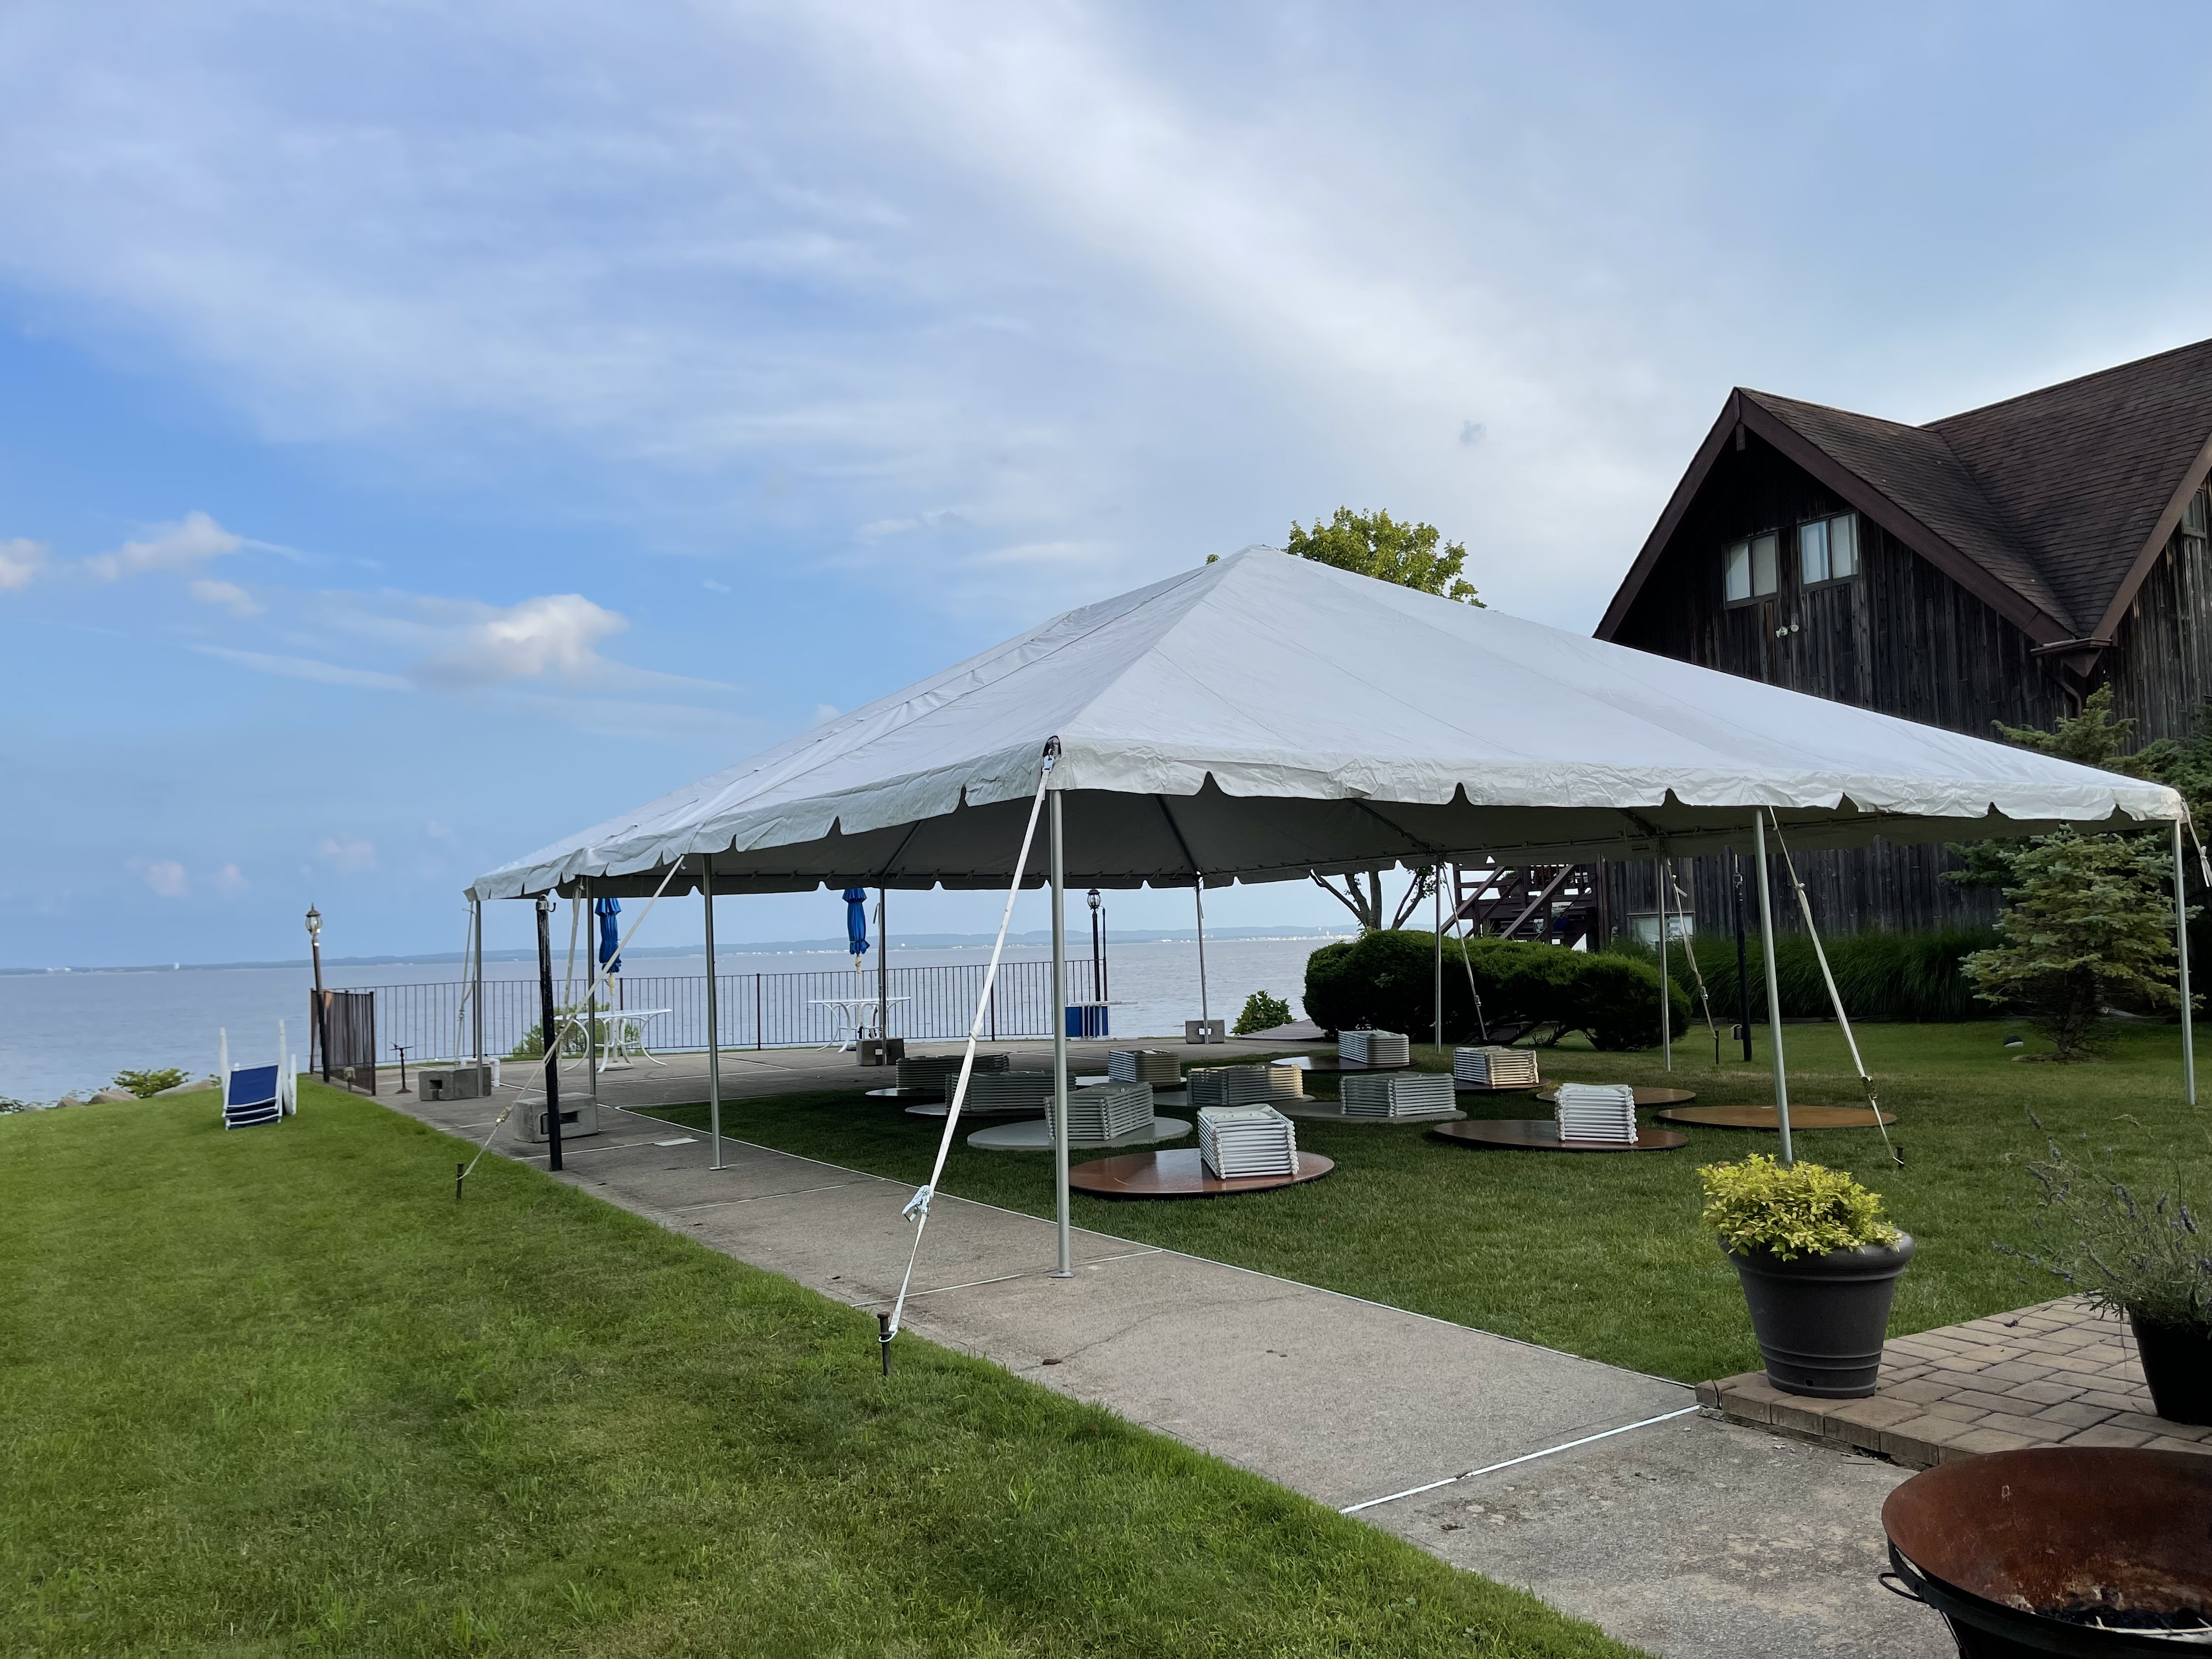 30x40 Frame Tent - Hire in New York, New Jersey